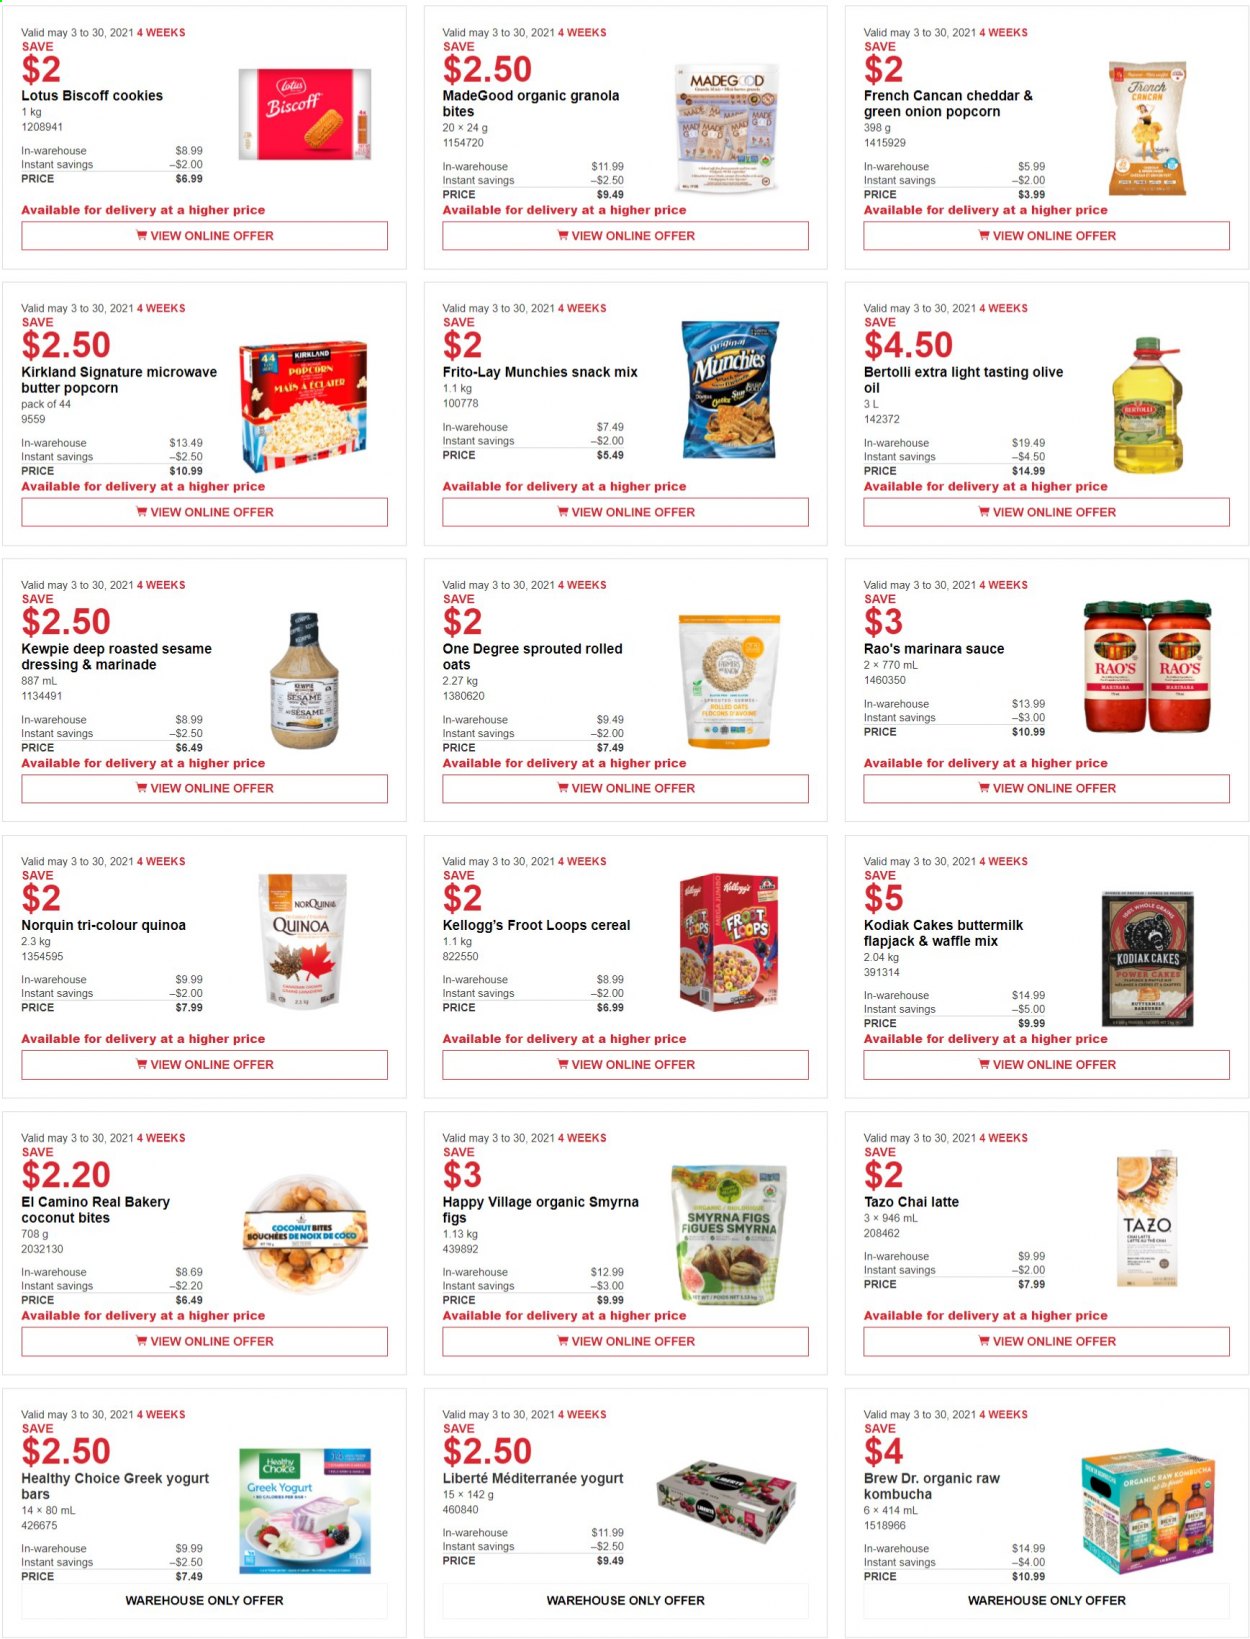 thumbnail - Costco Flyer - May 03, 2021 - May 30, 2021 - Sales products - cake, onion, figs, coconut, sauce, Healthy Choice, Bertolli, cheddar, greek yoghurt, buttermilk, sesame dressing, cookies, snack, Kellogg's, popcorn, Frito-Lay, oats, cereals, rolled oats, dressing, marinade, olive oil, oil, kombucha, Lotus, microwave, granola, quinoa. Page 3.